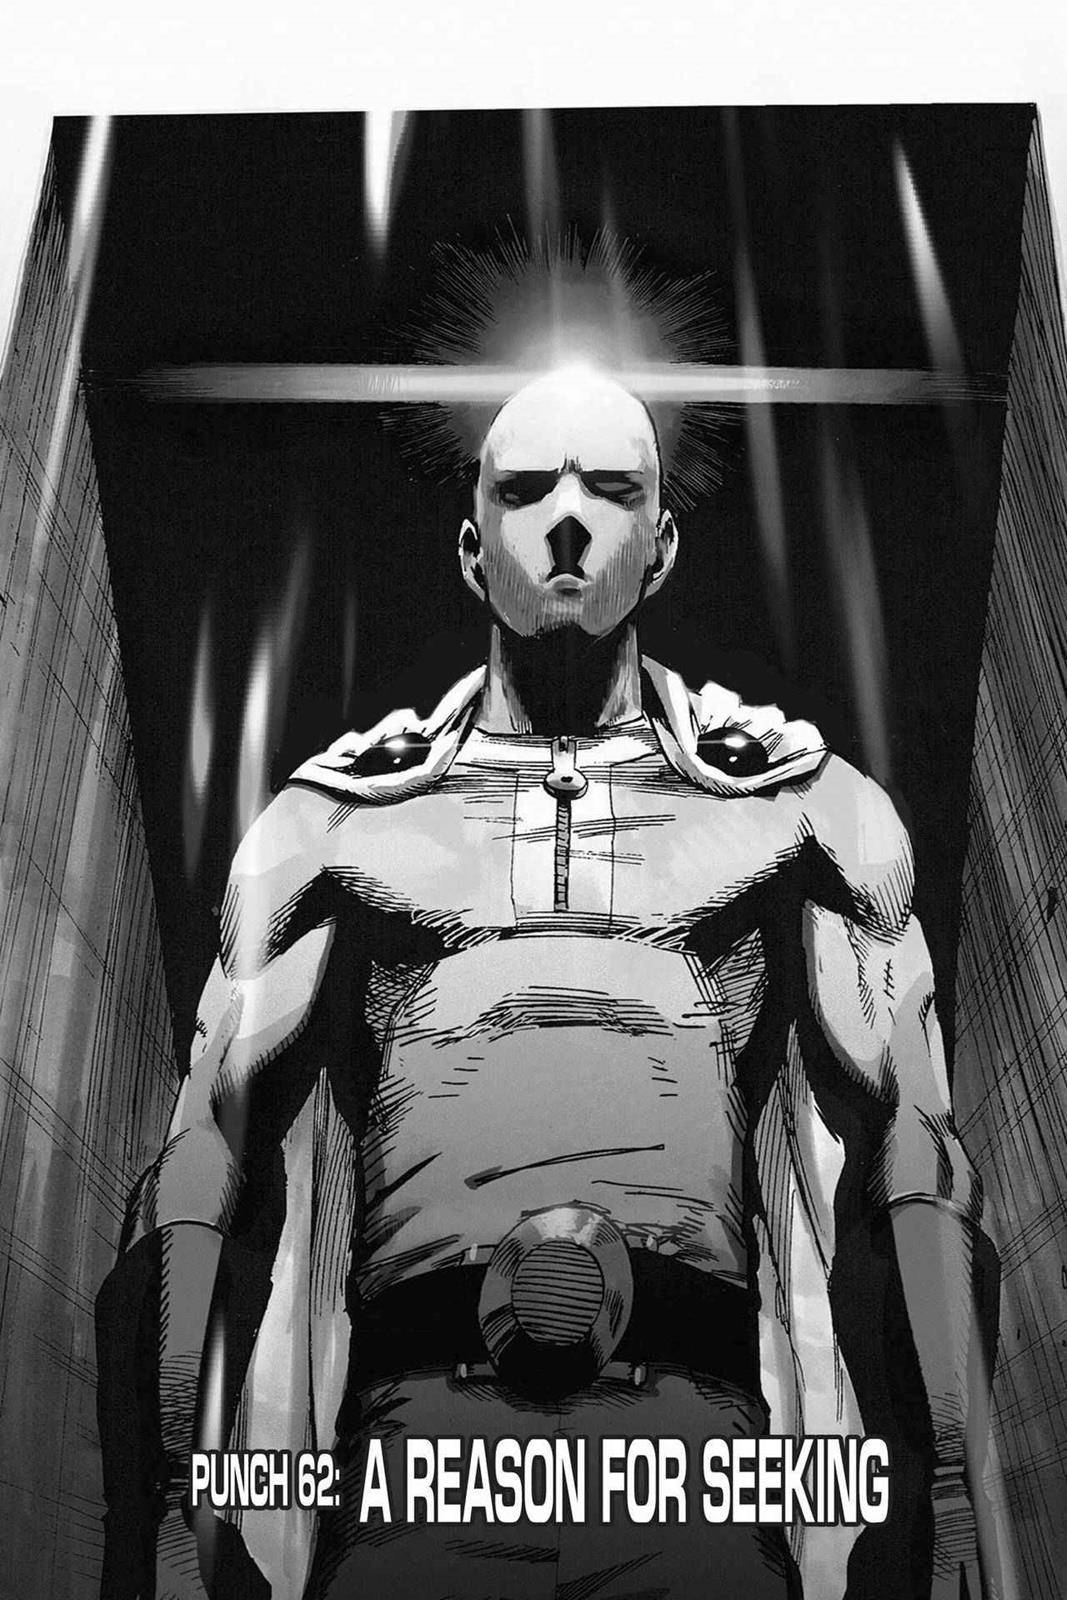 One-Punch Man, Punch 62 image 07